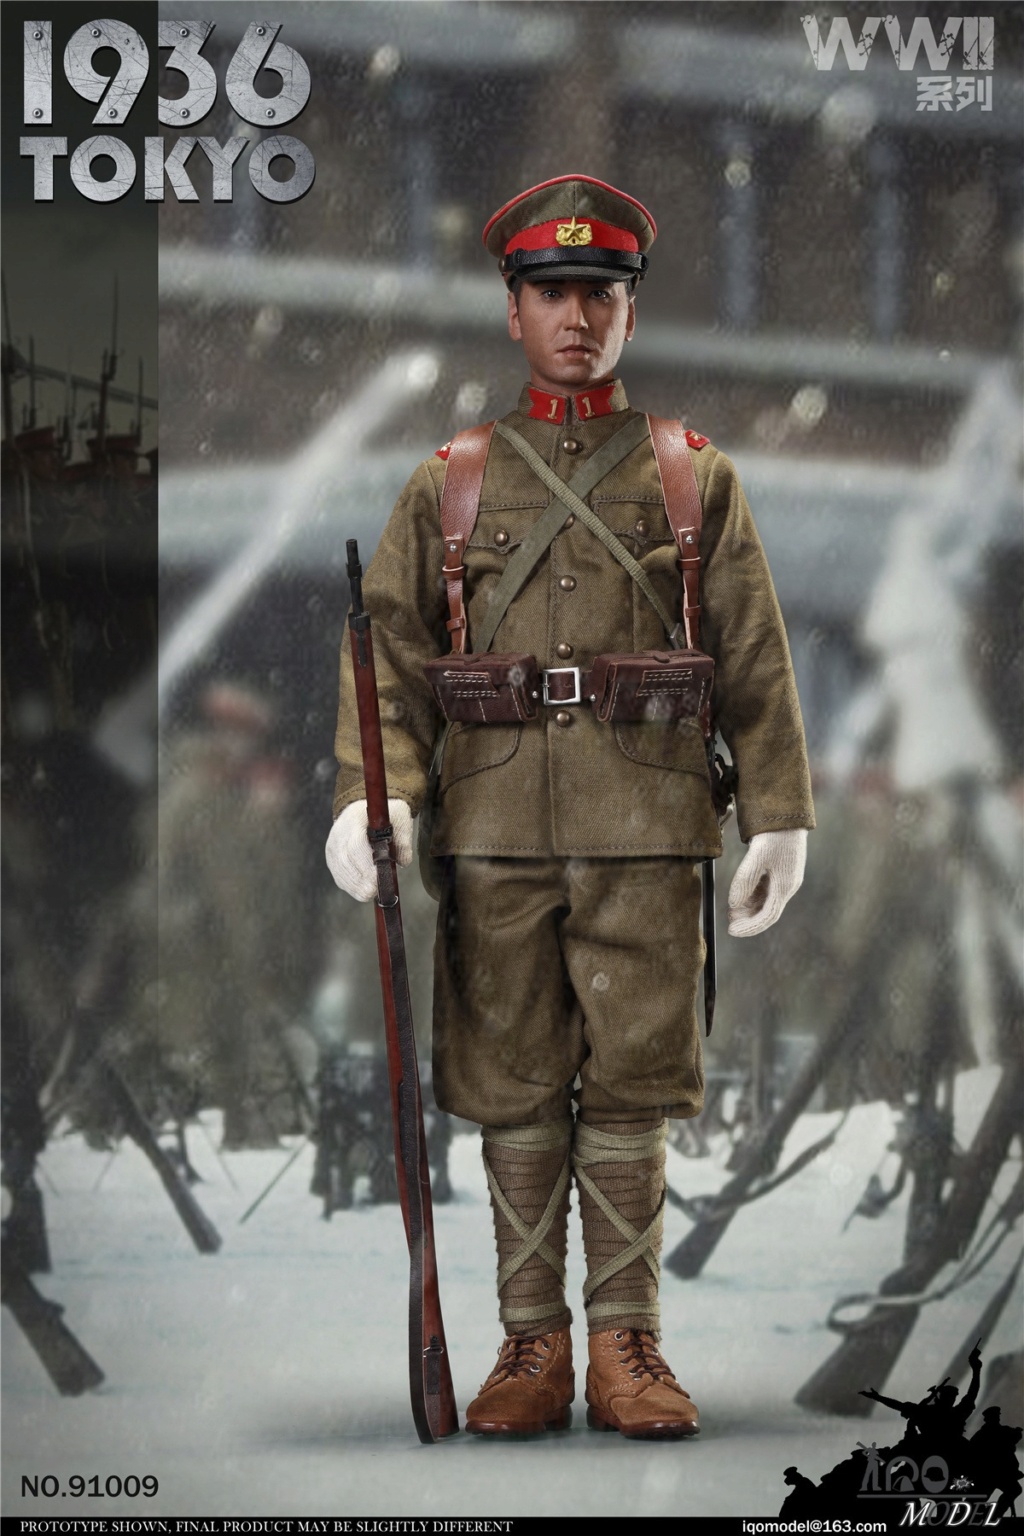 military - NEW PRODUCT: IQO Model: 1/6 WWII Series 1936 Tokyo (NO.91009) 15463711